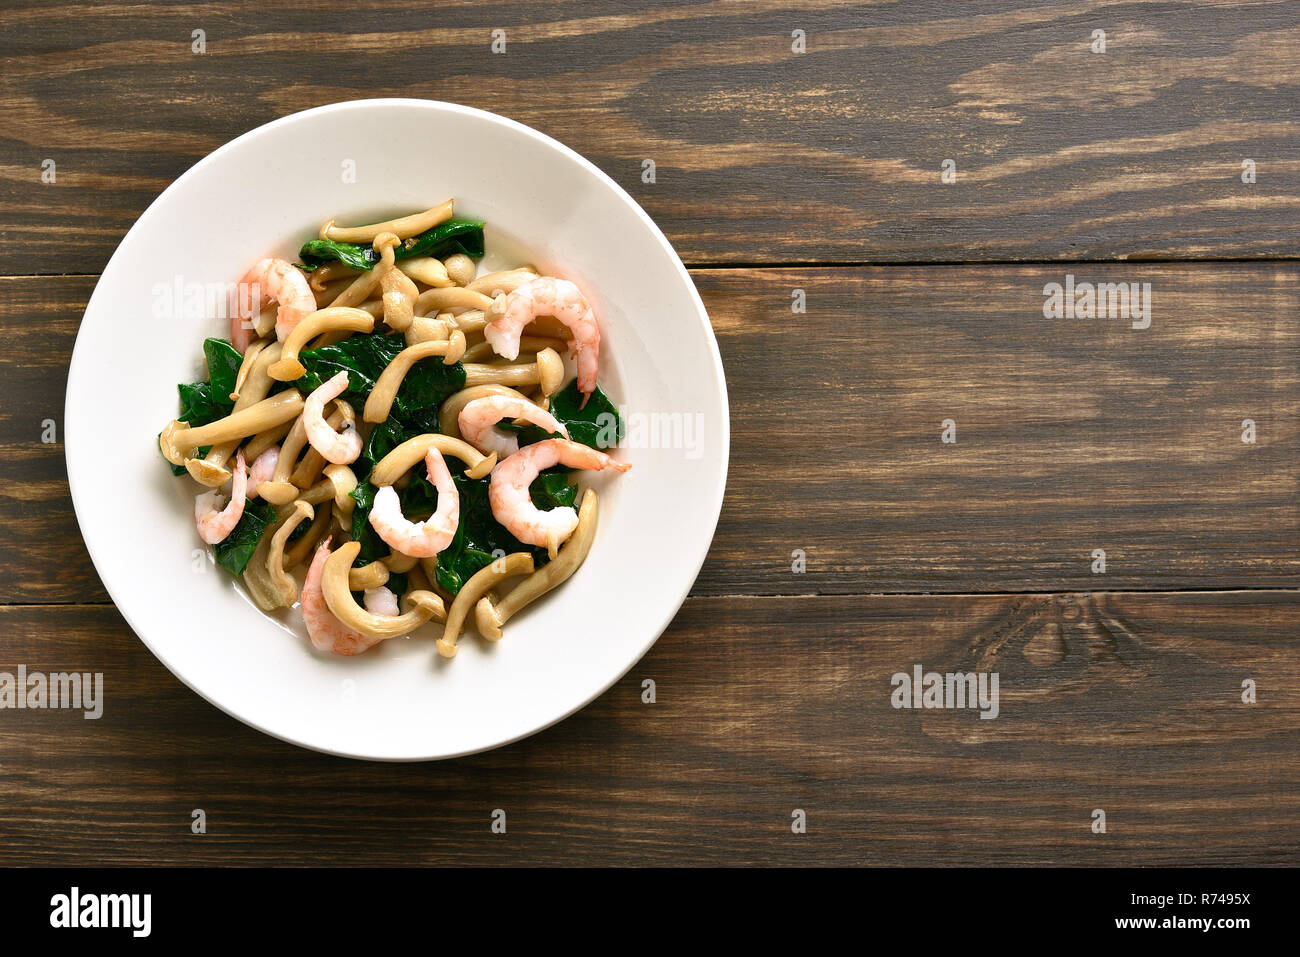 Cooked white beech mushrooms with leaves of spinach and shrimps on wooden background with copy space. Top view, flat lay Stock Photo